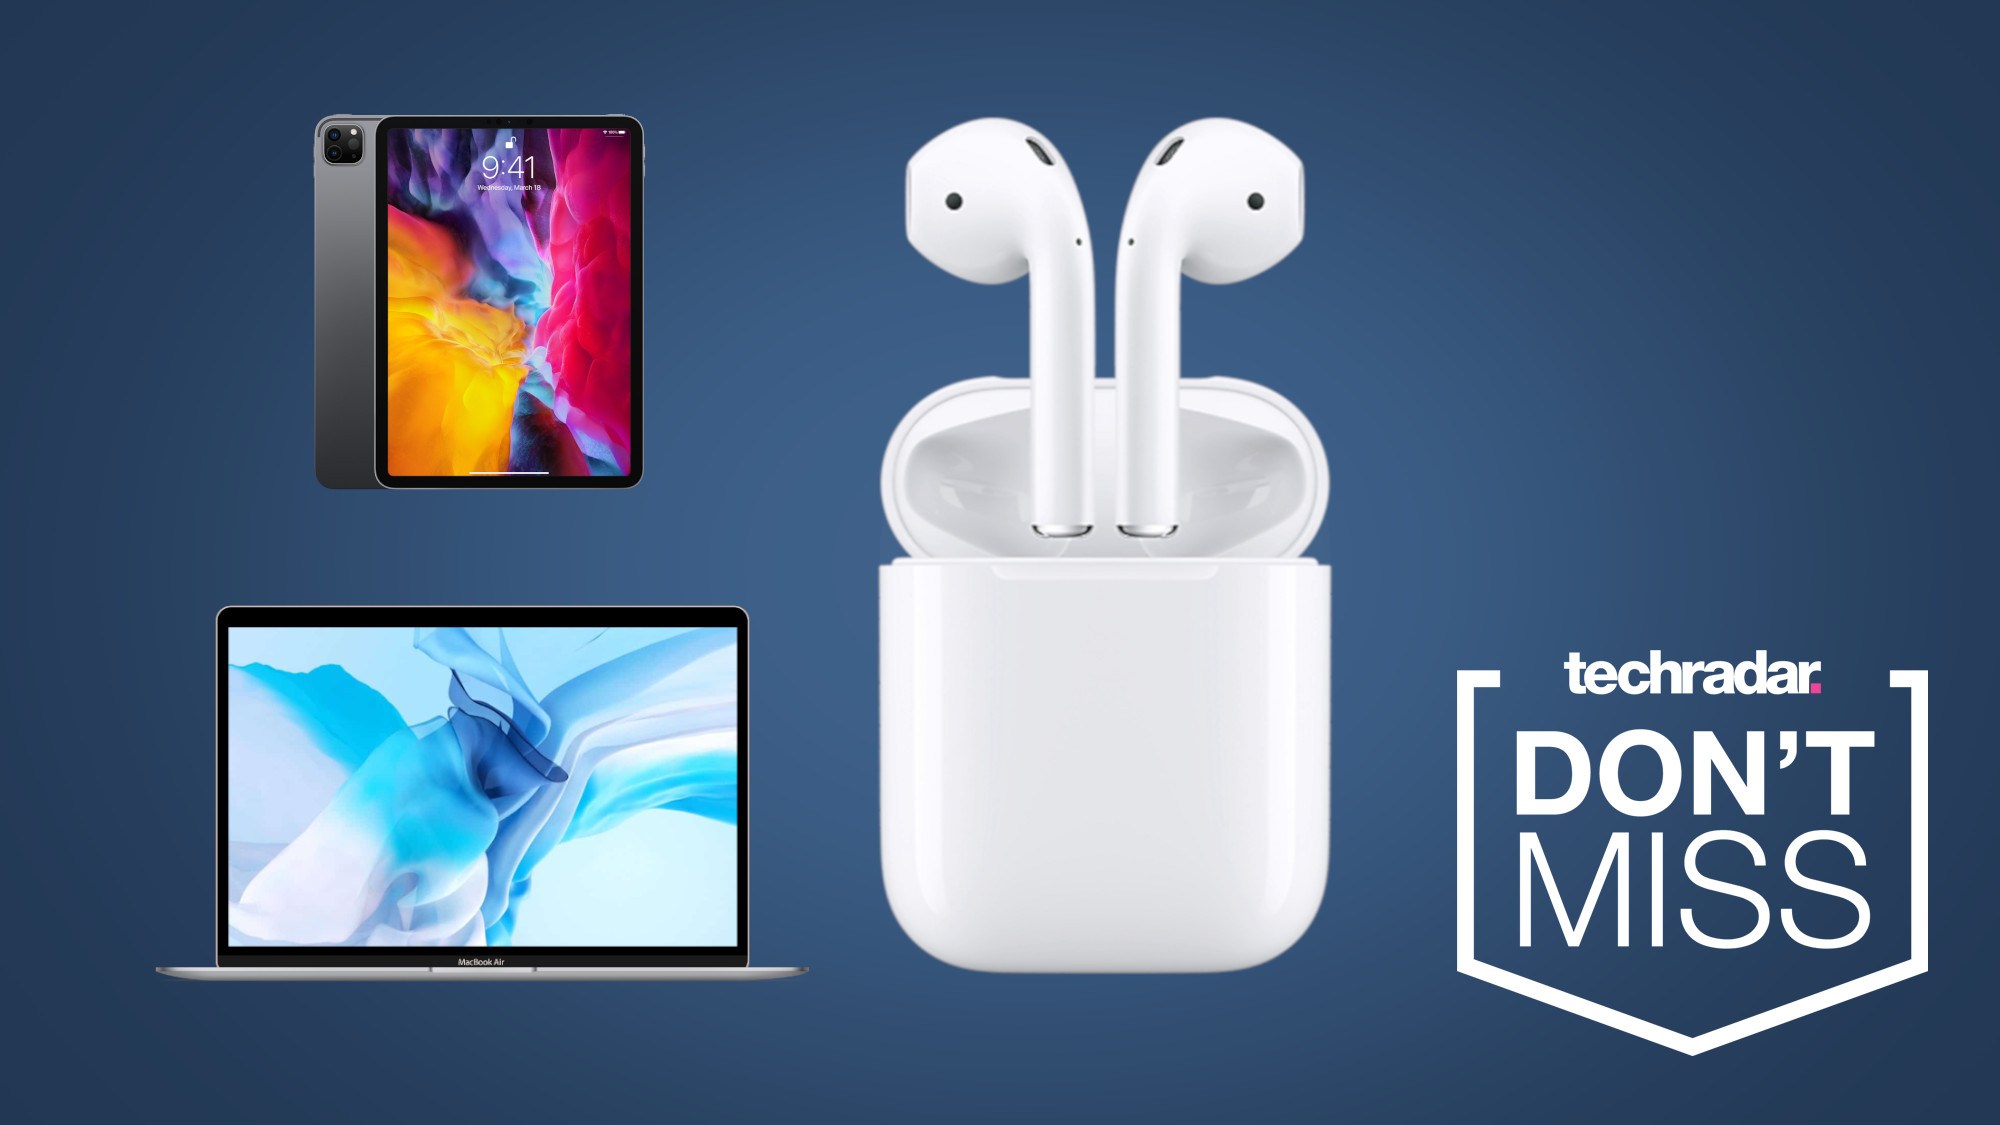 The Apple Back To School Event Is Now Worldwide Offering Free Airpods Techradar